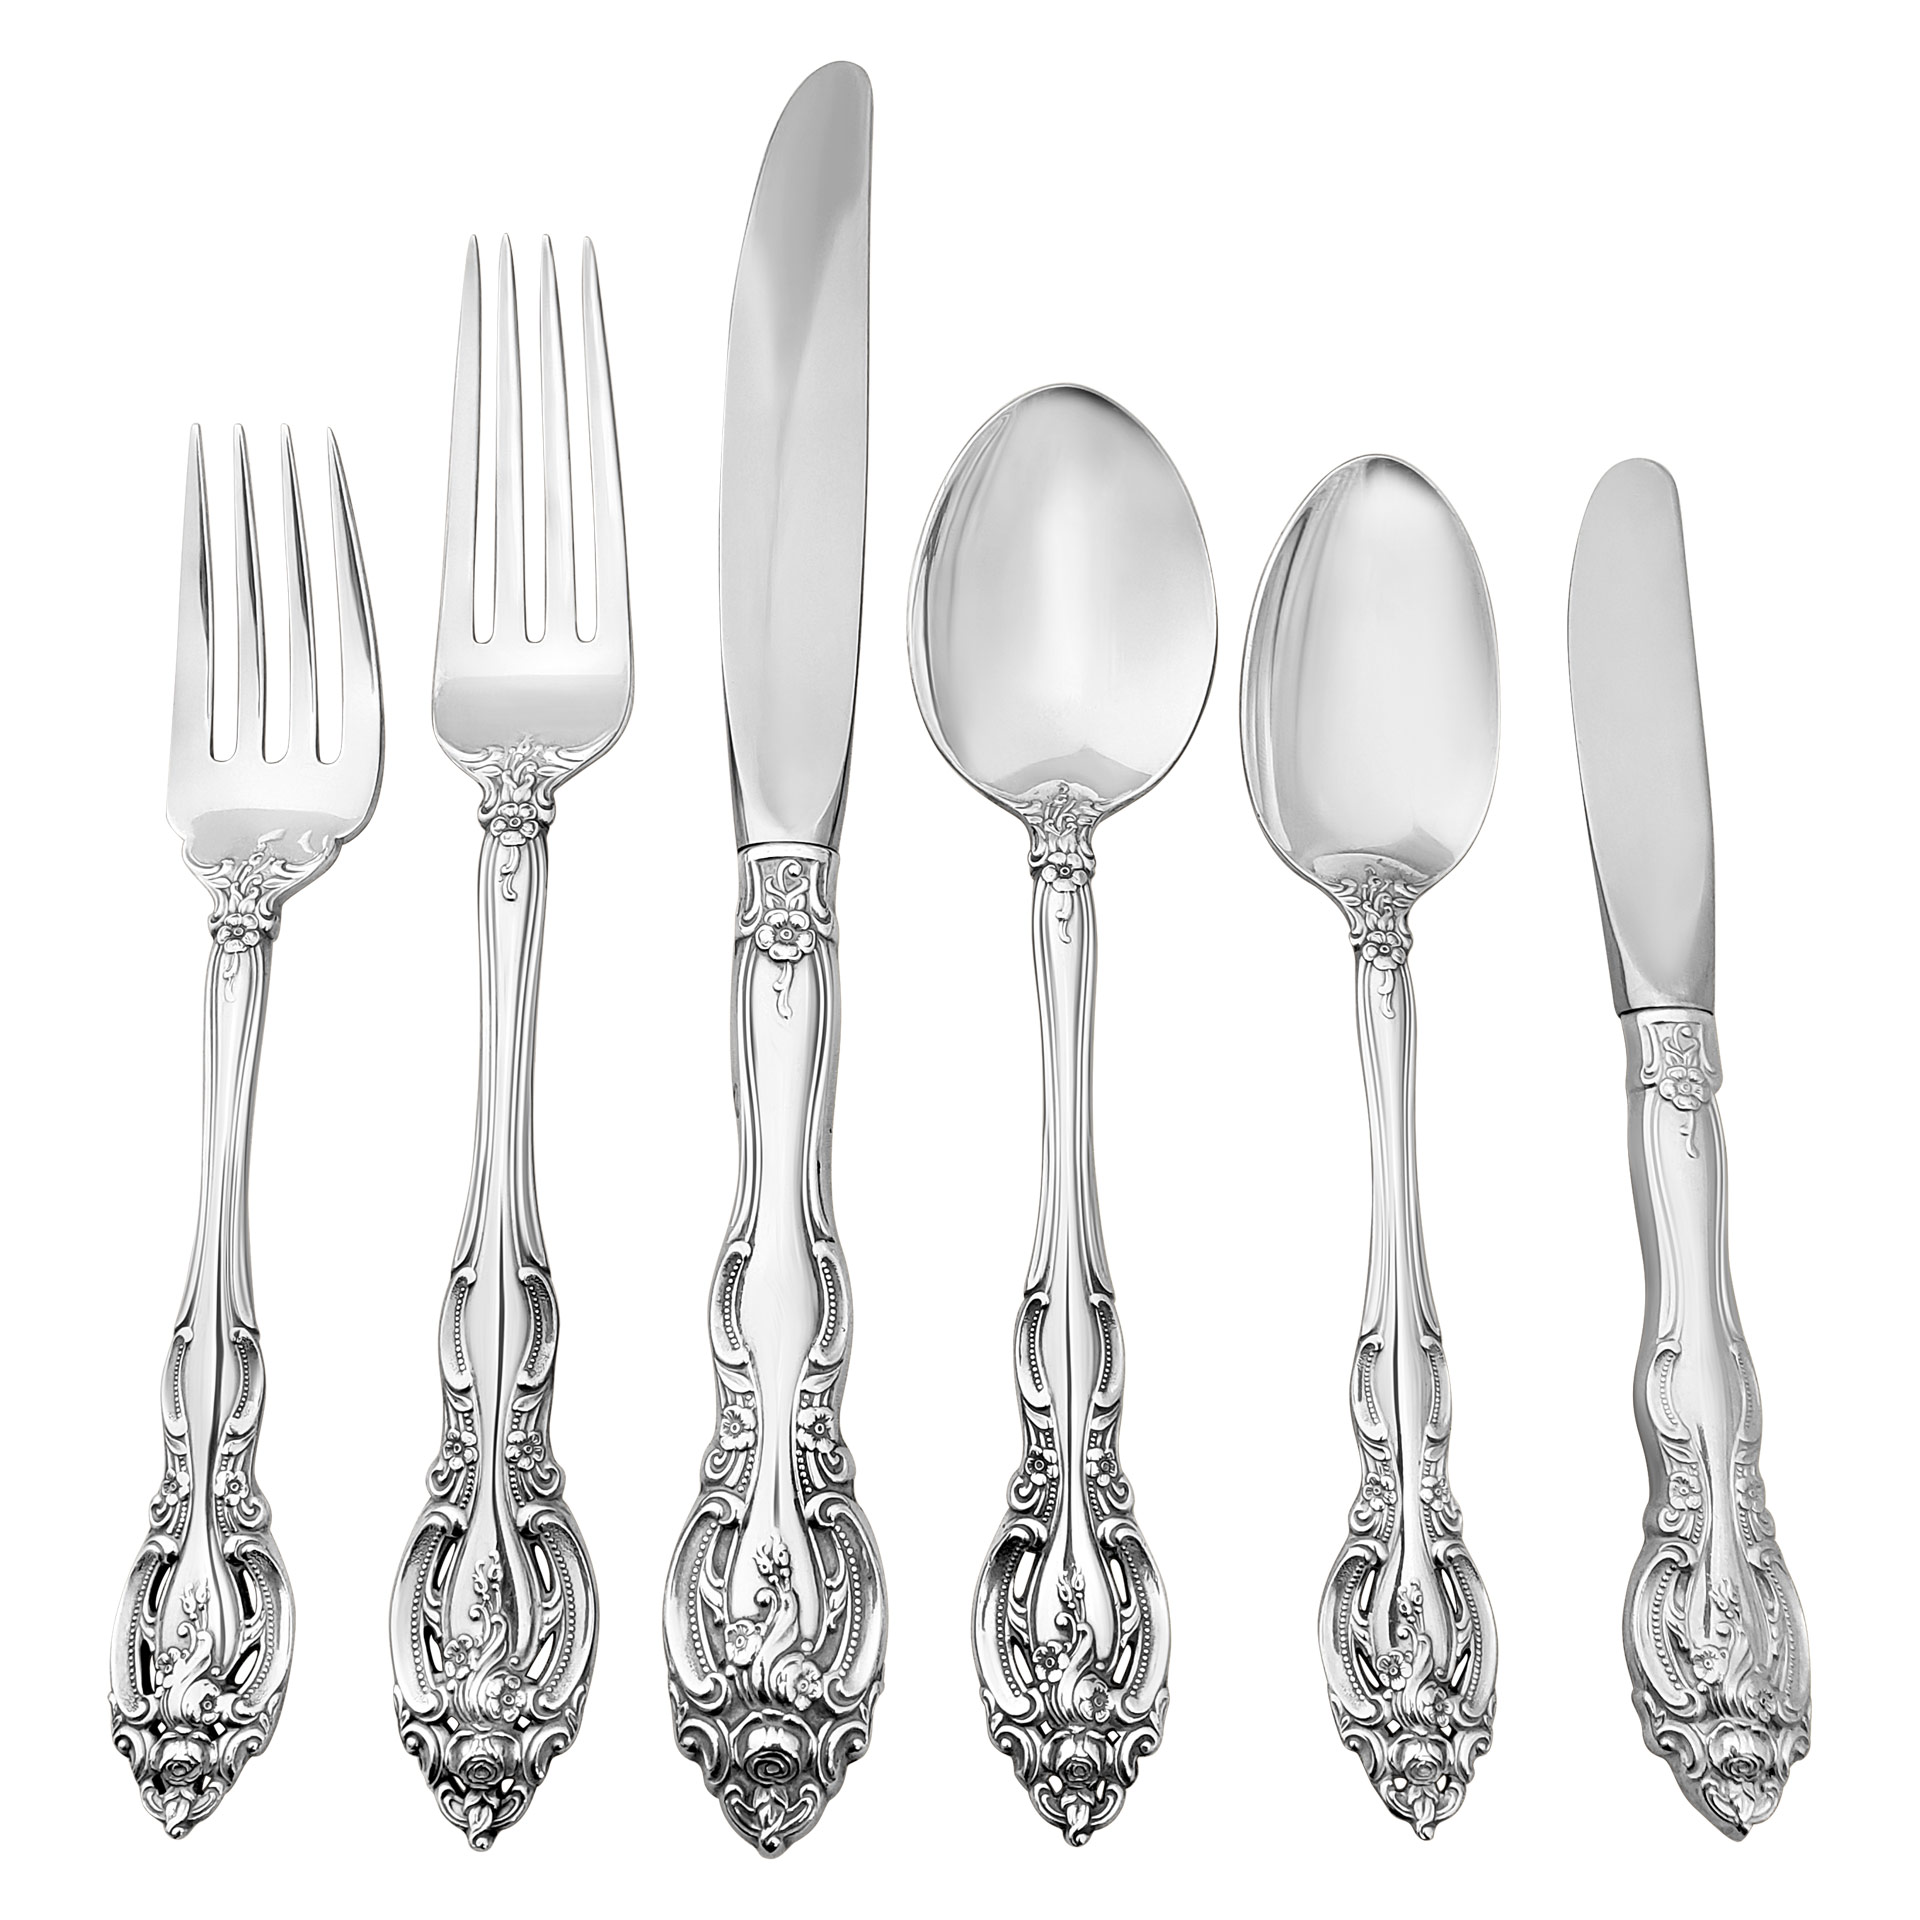 "LA SCALA" Sterling silver flatware set patented in 1964 by Gorham. 6 Place setting for 12 with 7 serving pieces.TOTAL 87 PIECES Over  3285 grams sterling silver. image 1